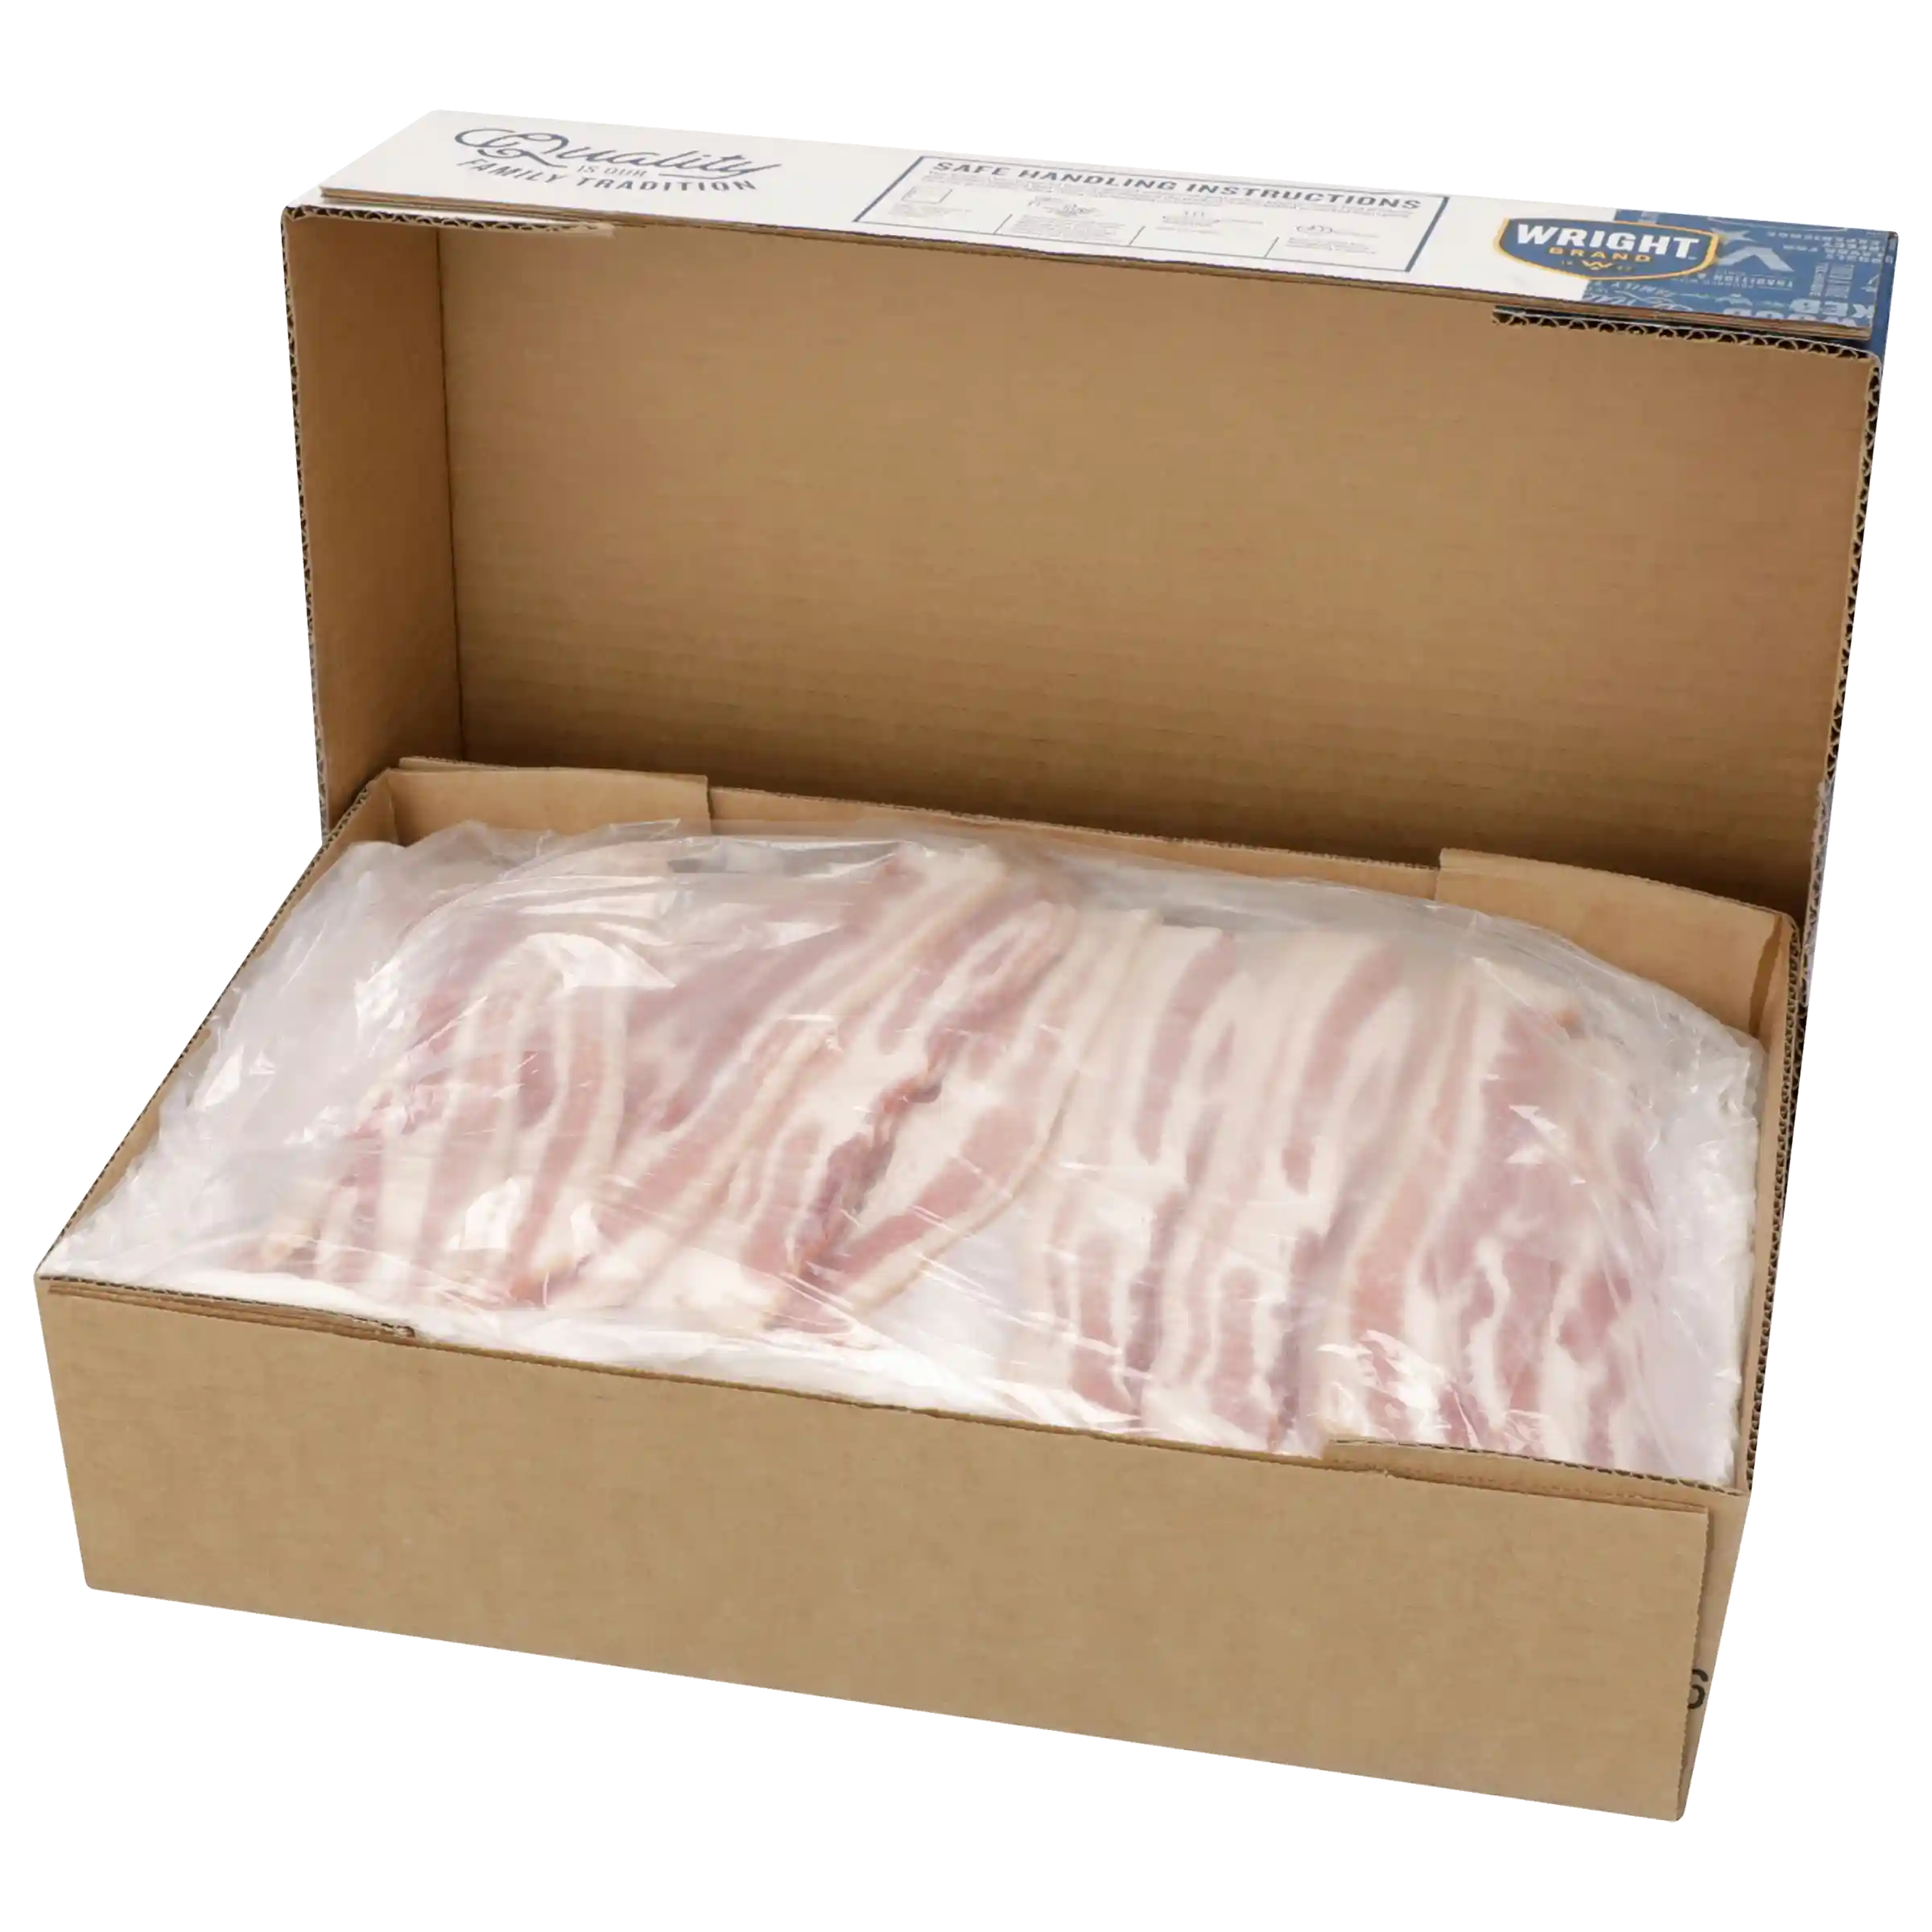 Wright® Brand Naturally Hickory Smoked Thick Sliced Bacon, Flat-Pack®, 15 Lbs, 10-14 Slices per Pound, Frozen_image_31